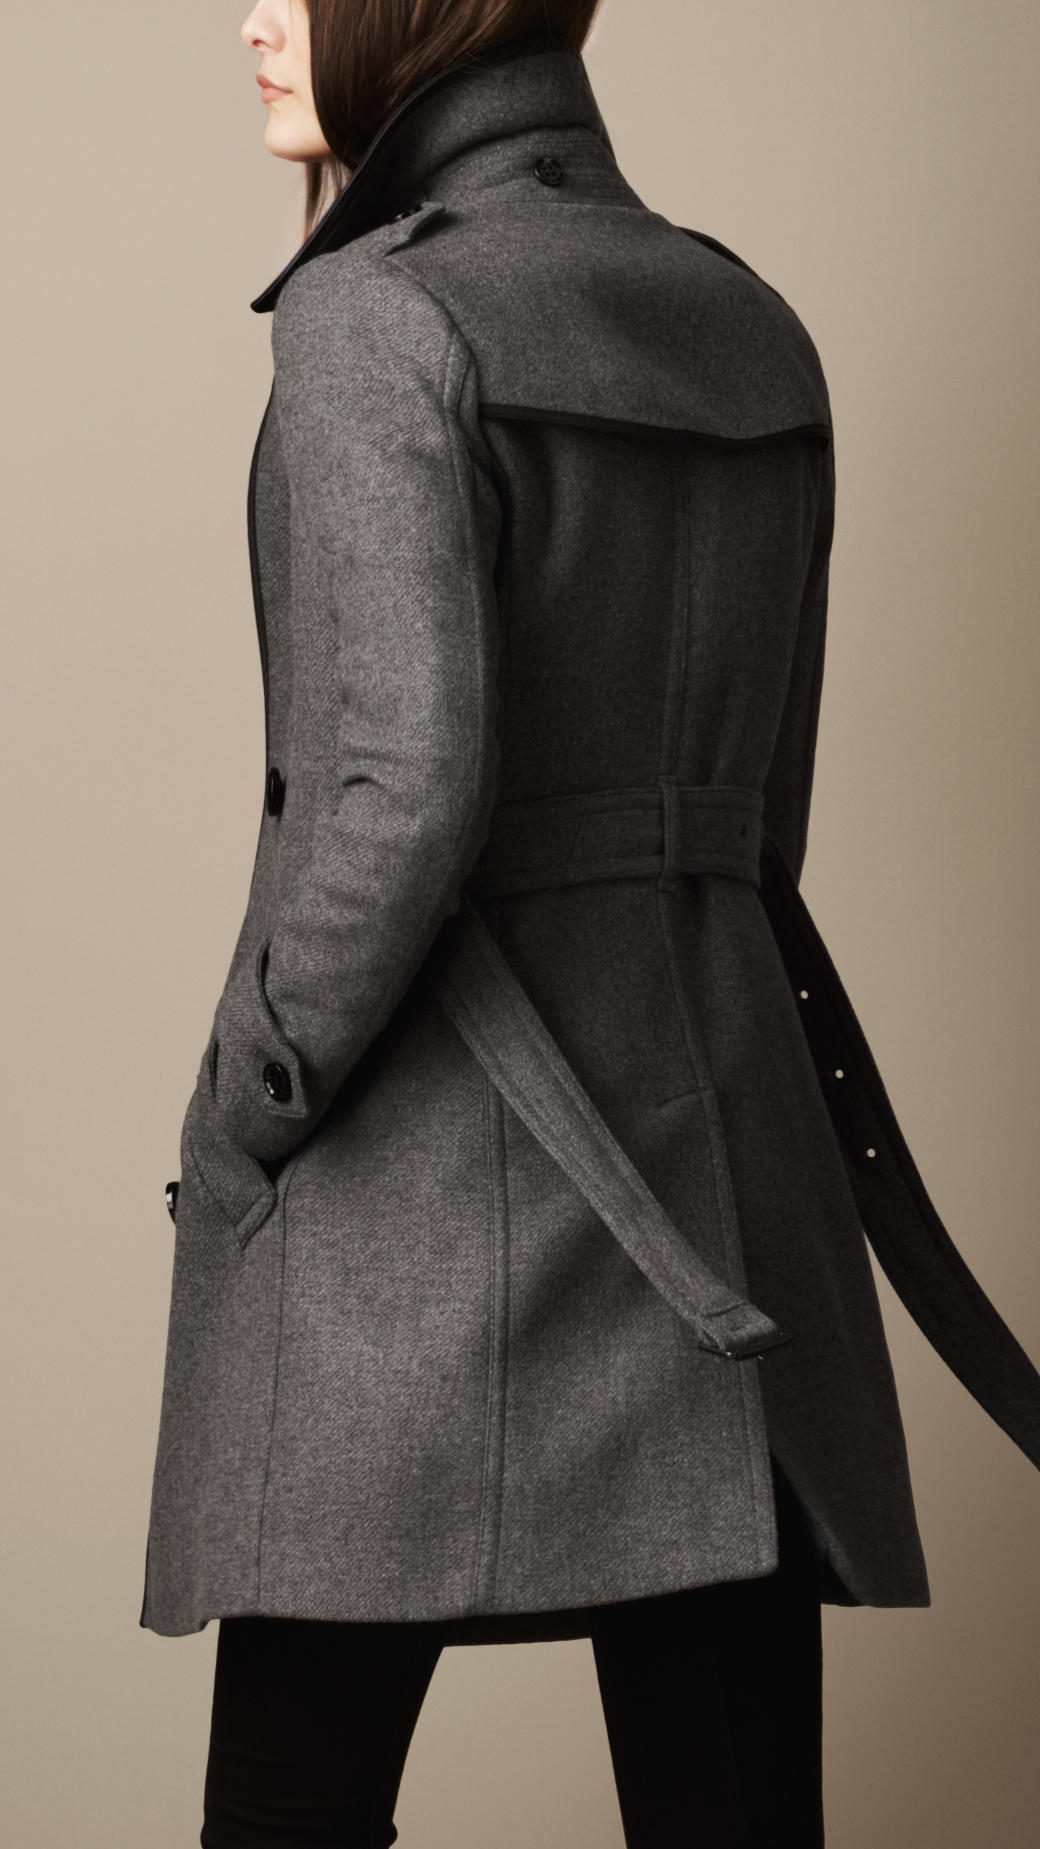 Lyst - Burberry Brit Midlength Woven Wool Blend Trench Coat in Gray